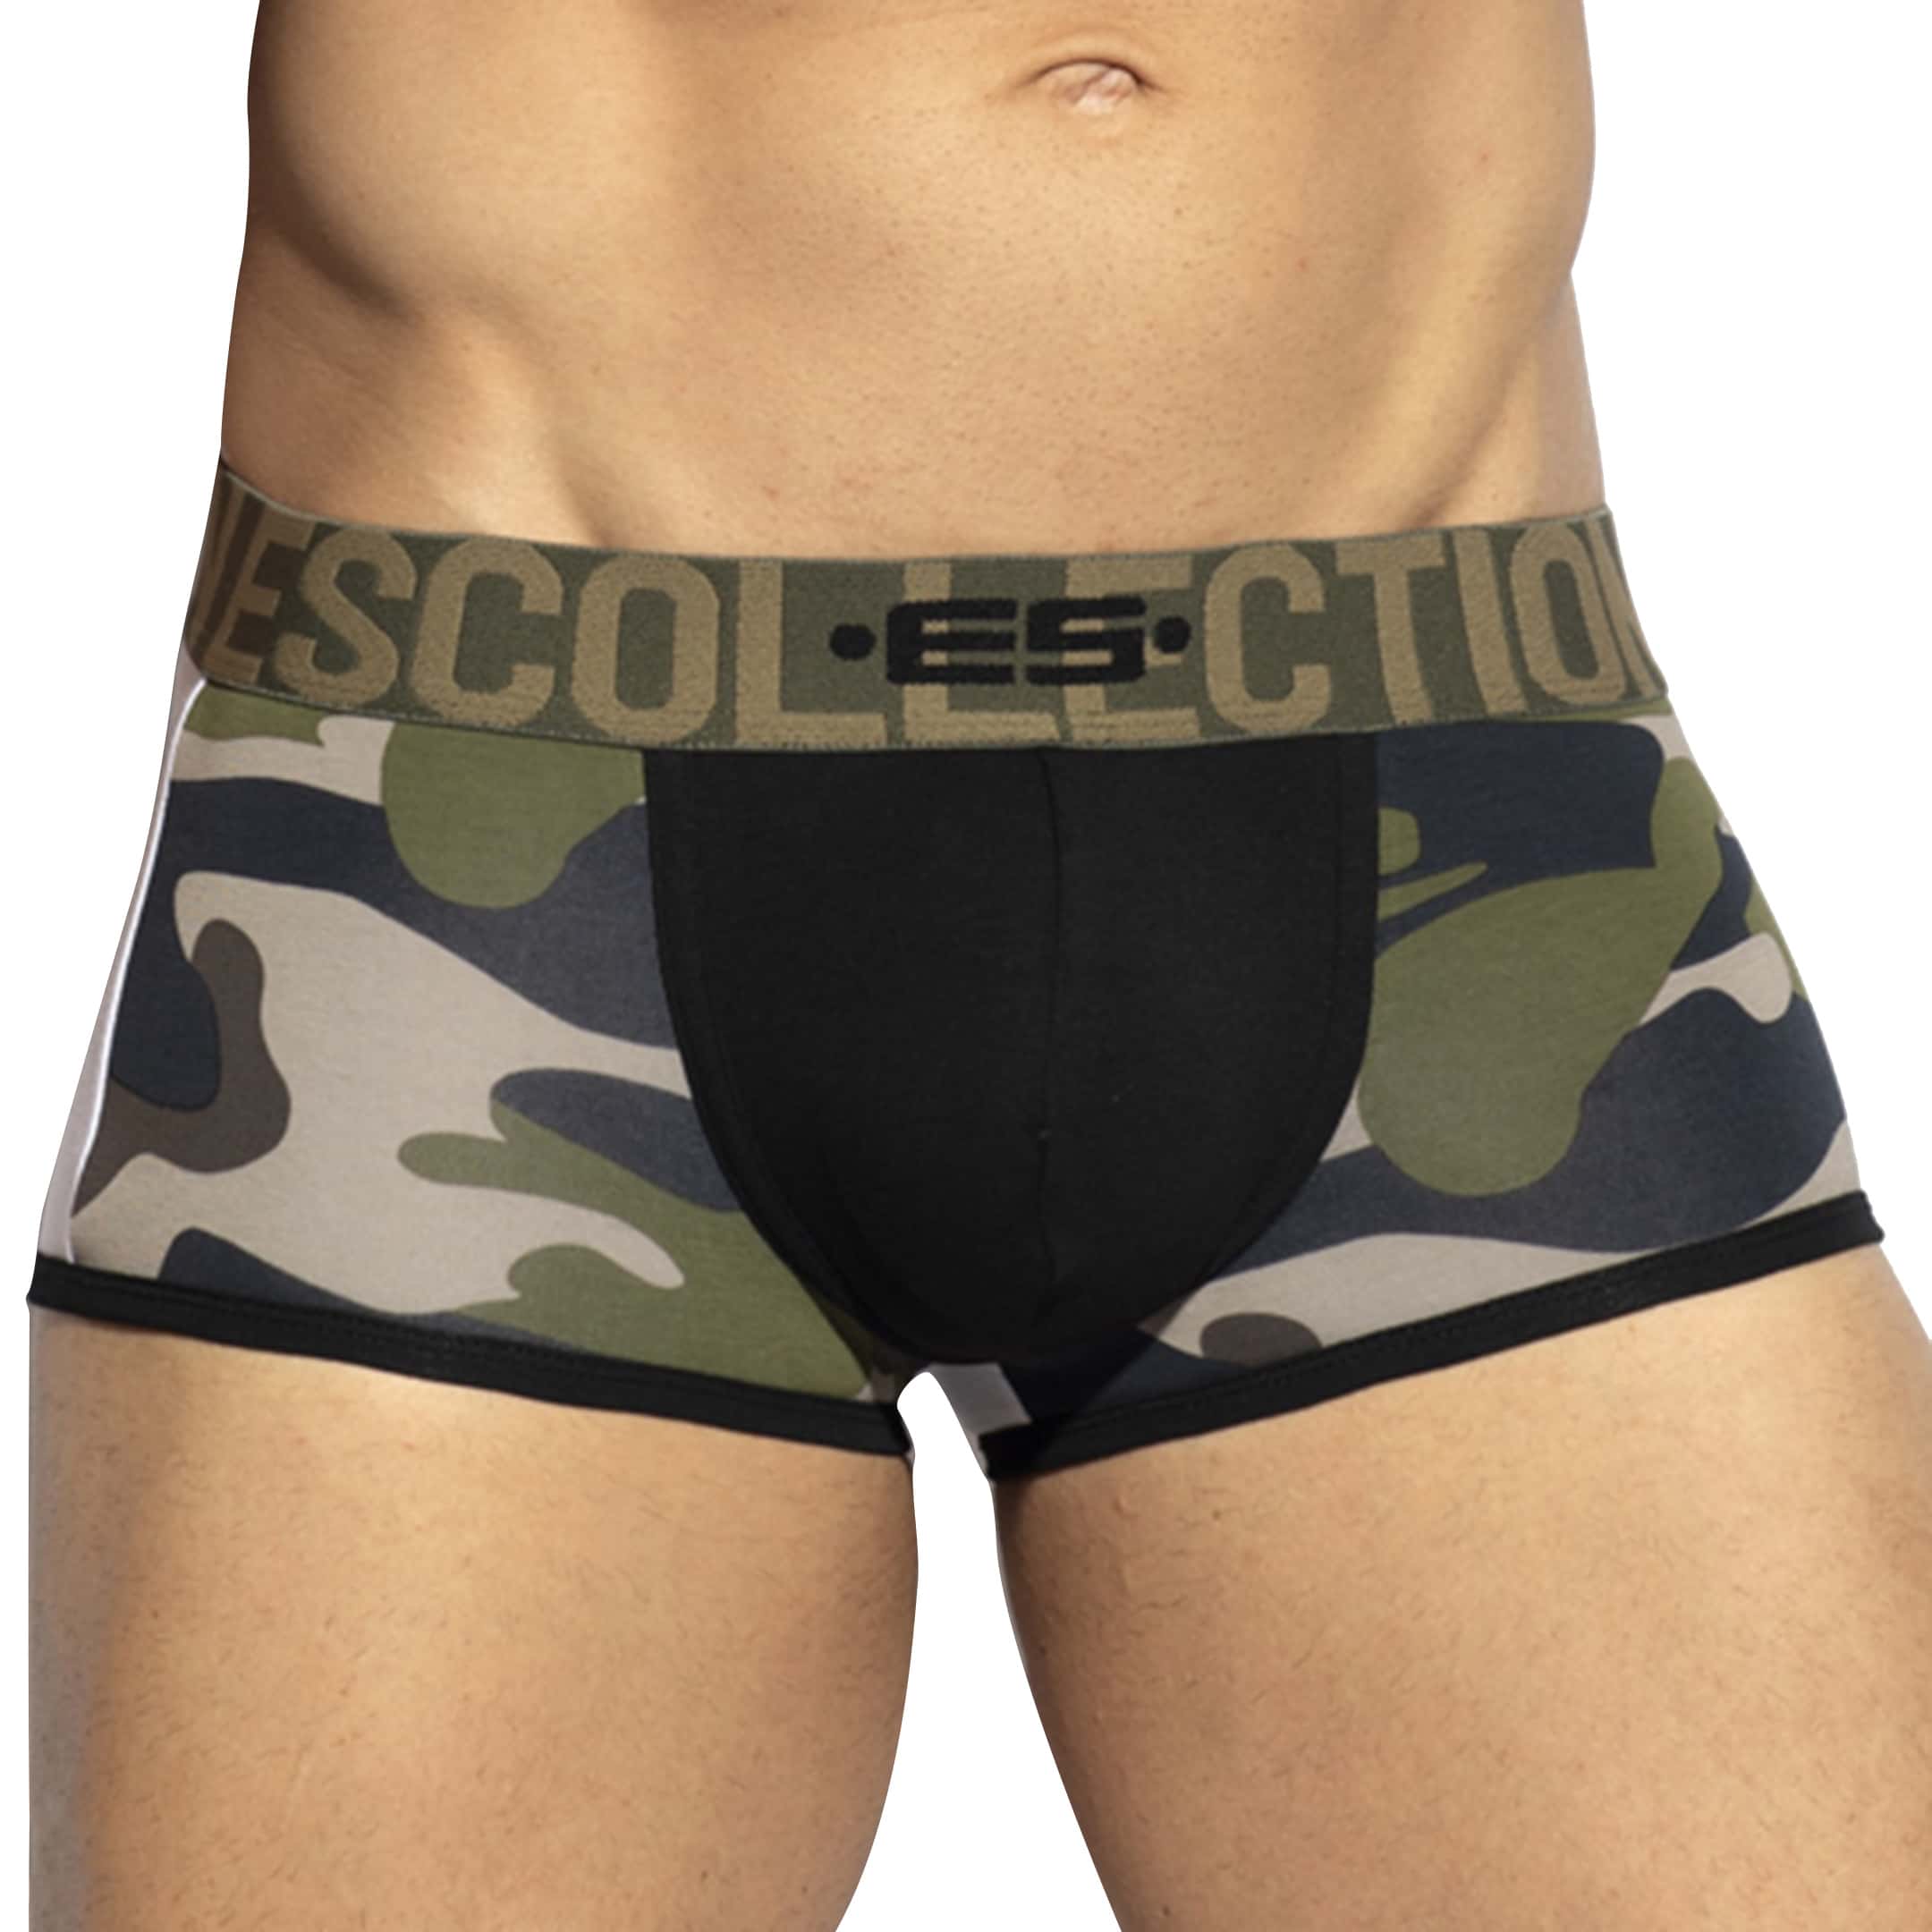 https://www.inderwear.com/161244/colorful-trunks-black-camo-white-es-collection.jpg